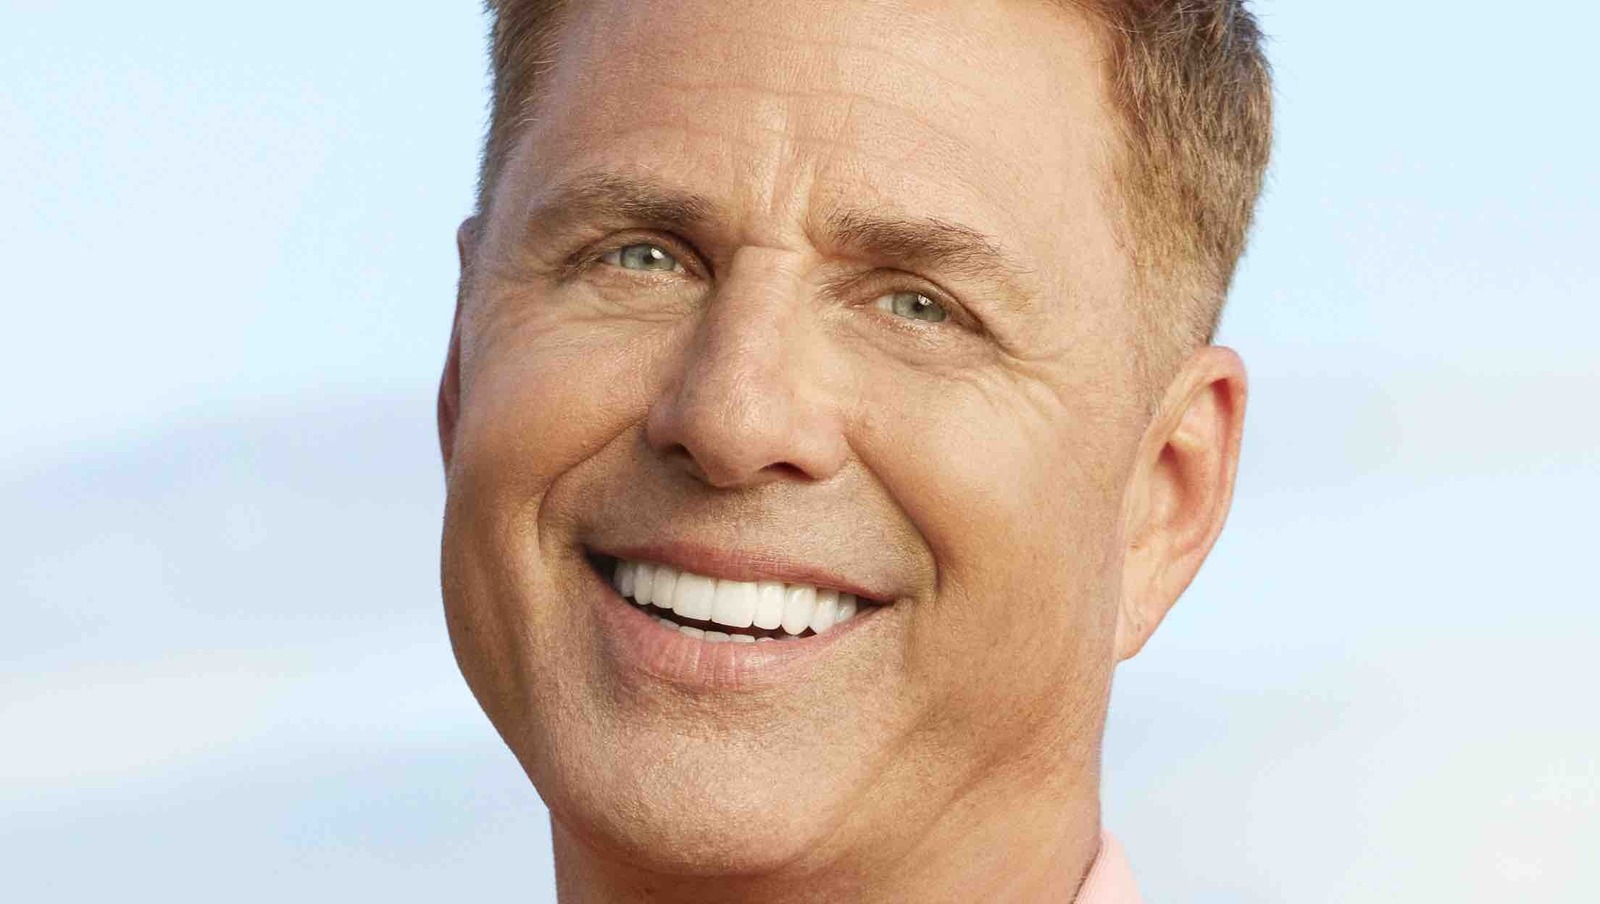 Temptation Island Host Mark L. Walberg Shares Why The Show Connects